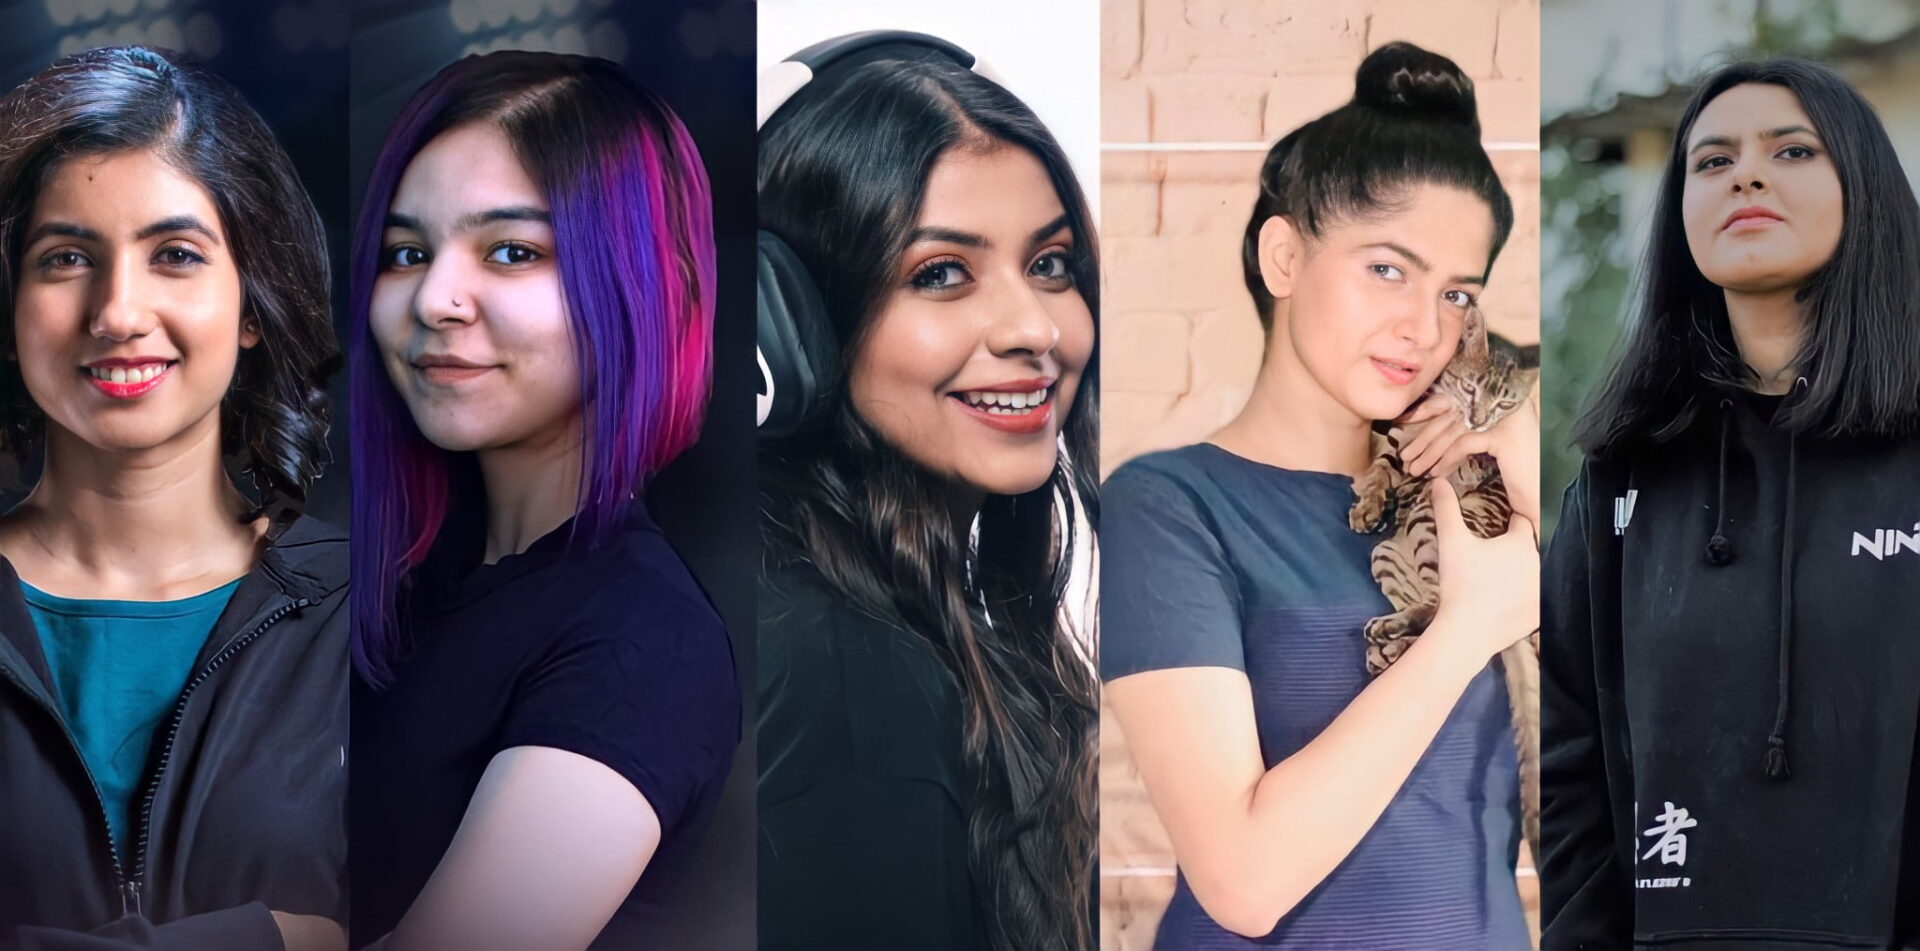 Top 5 Gamer Girls of India in 2021